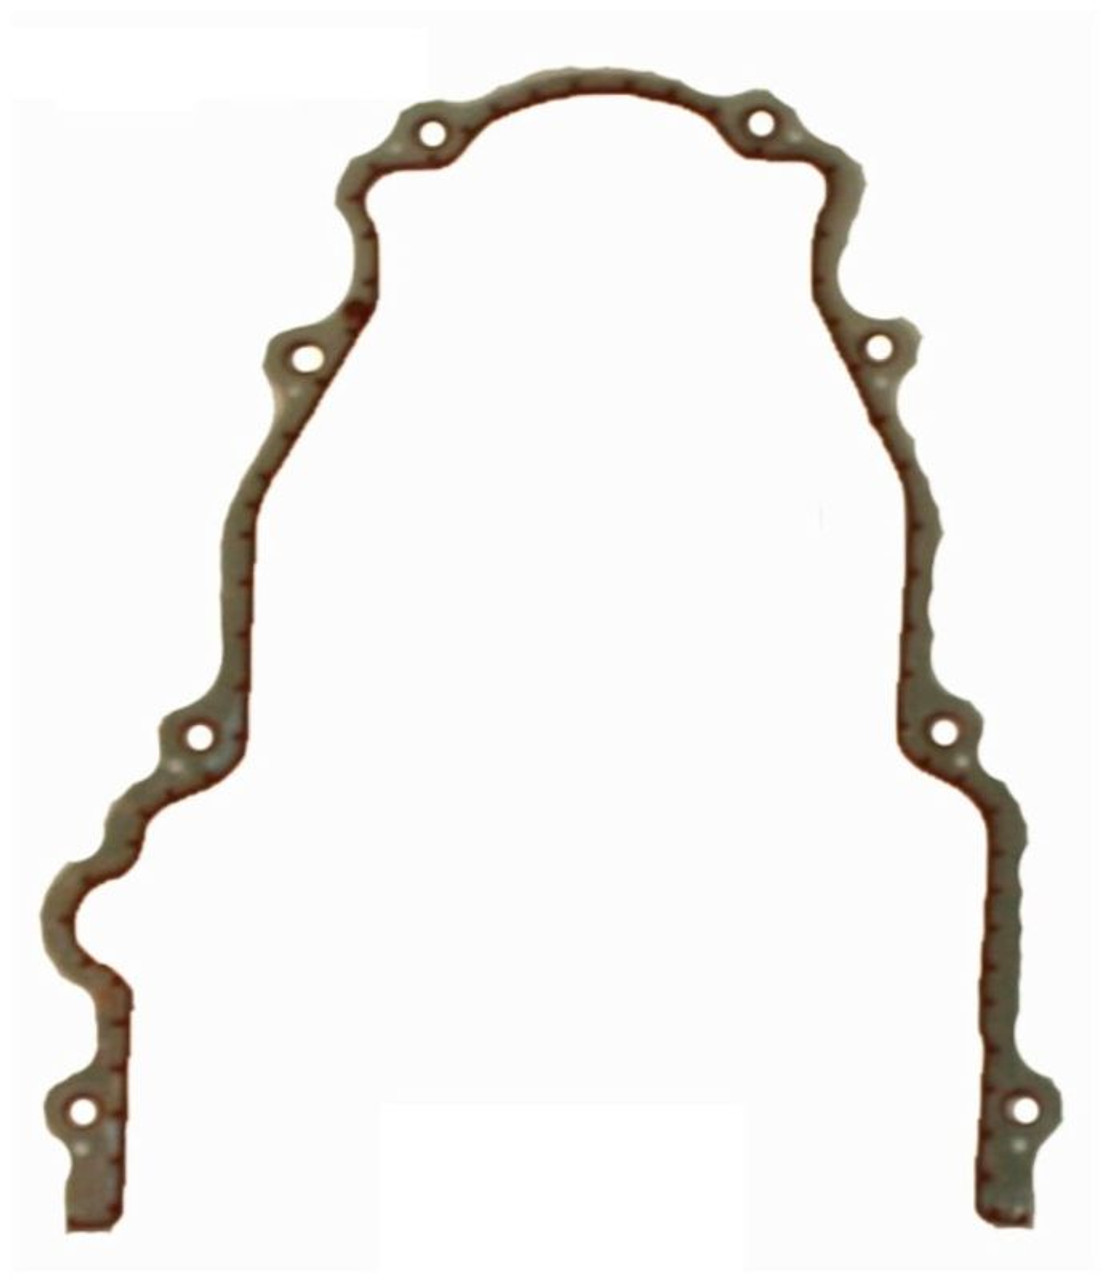 2010 Cadillac Escalade EXT 6.2L Engine Timing Cover Gasket TCG293-A -636